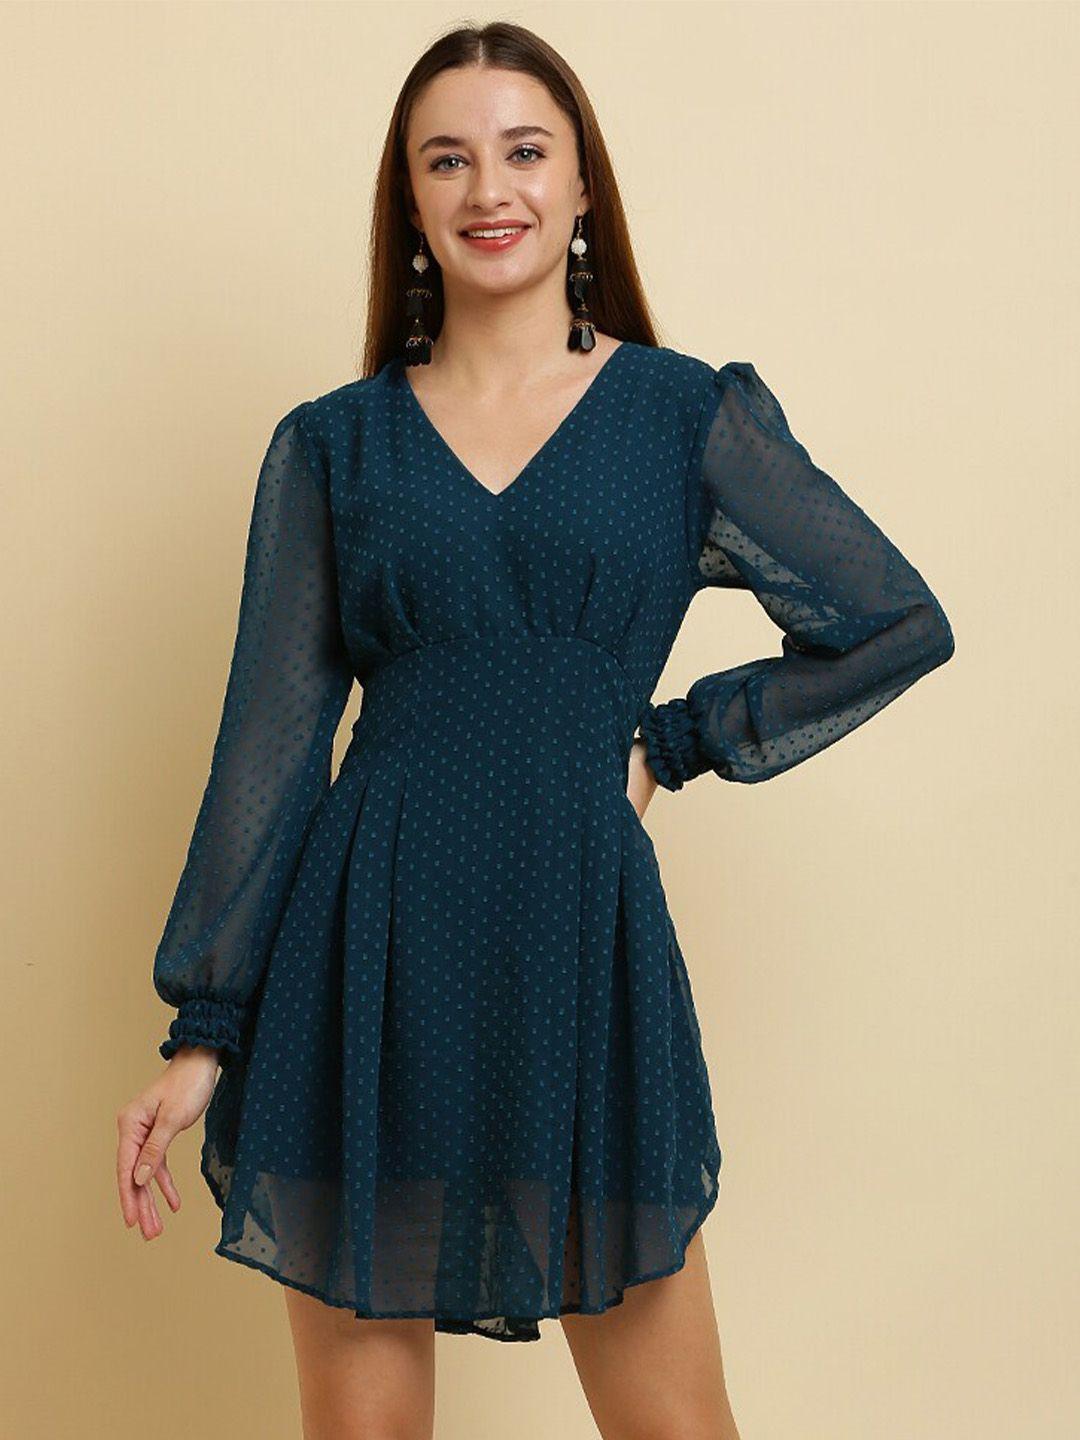 here&now-teal-polka-dot-puff-sleeve-chiffon-fit-&-flare-dress